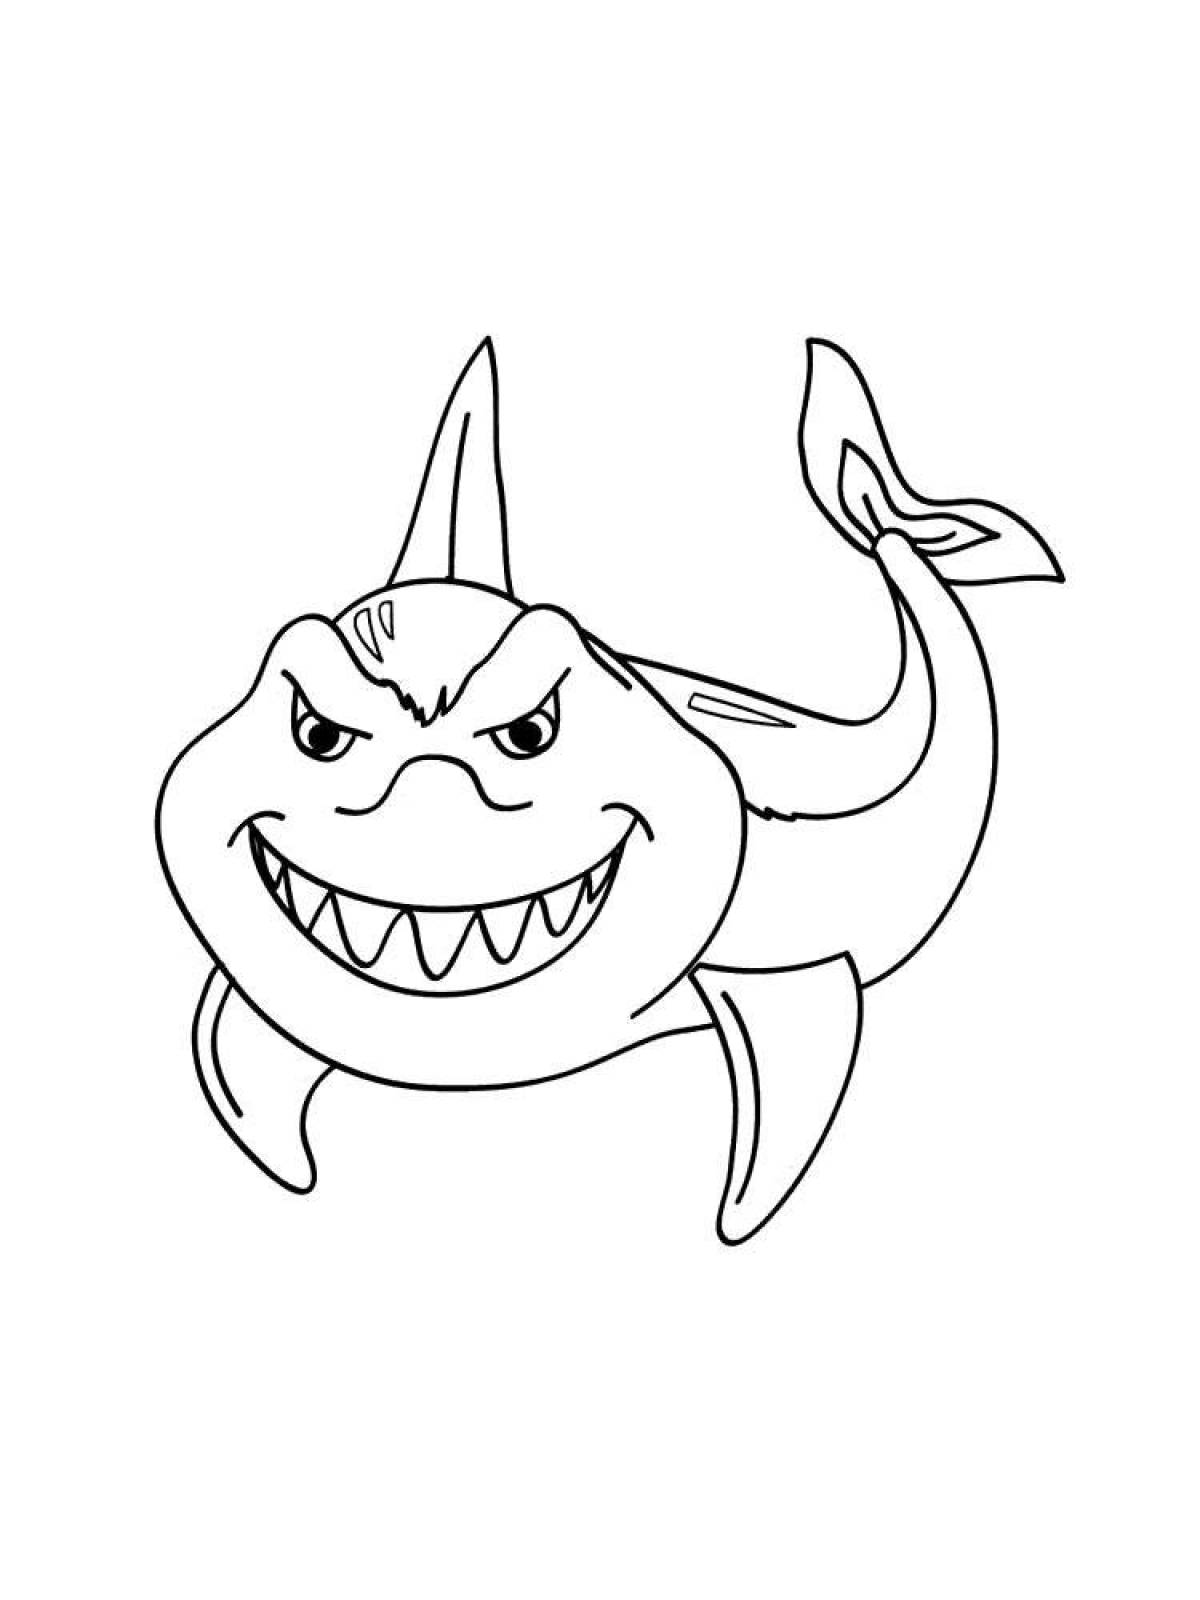 A funny shark coloring book for kids